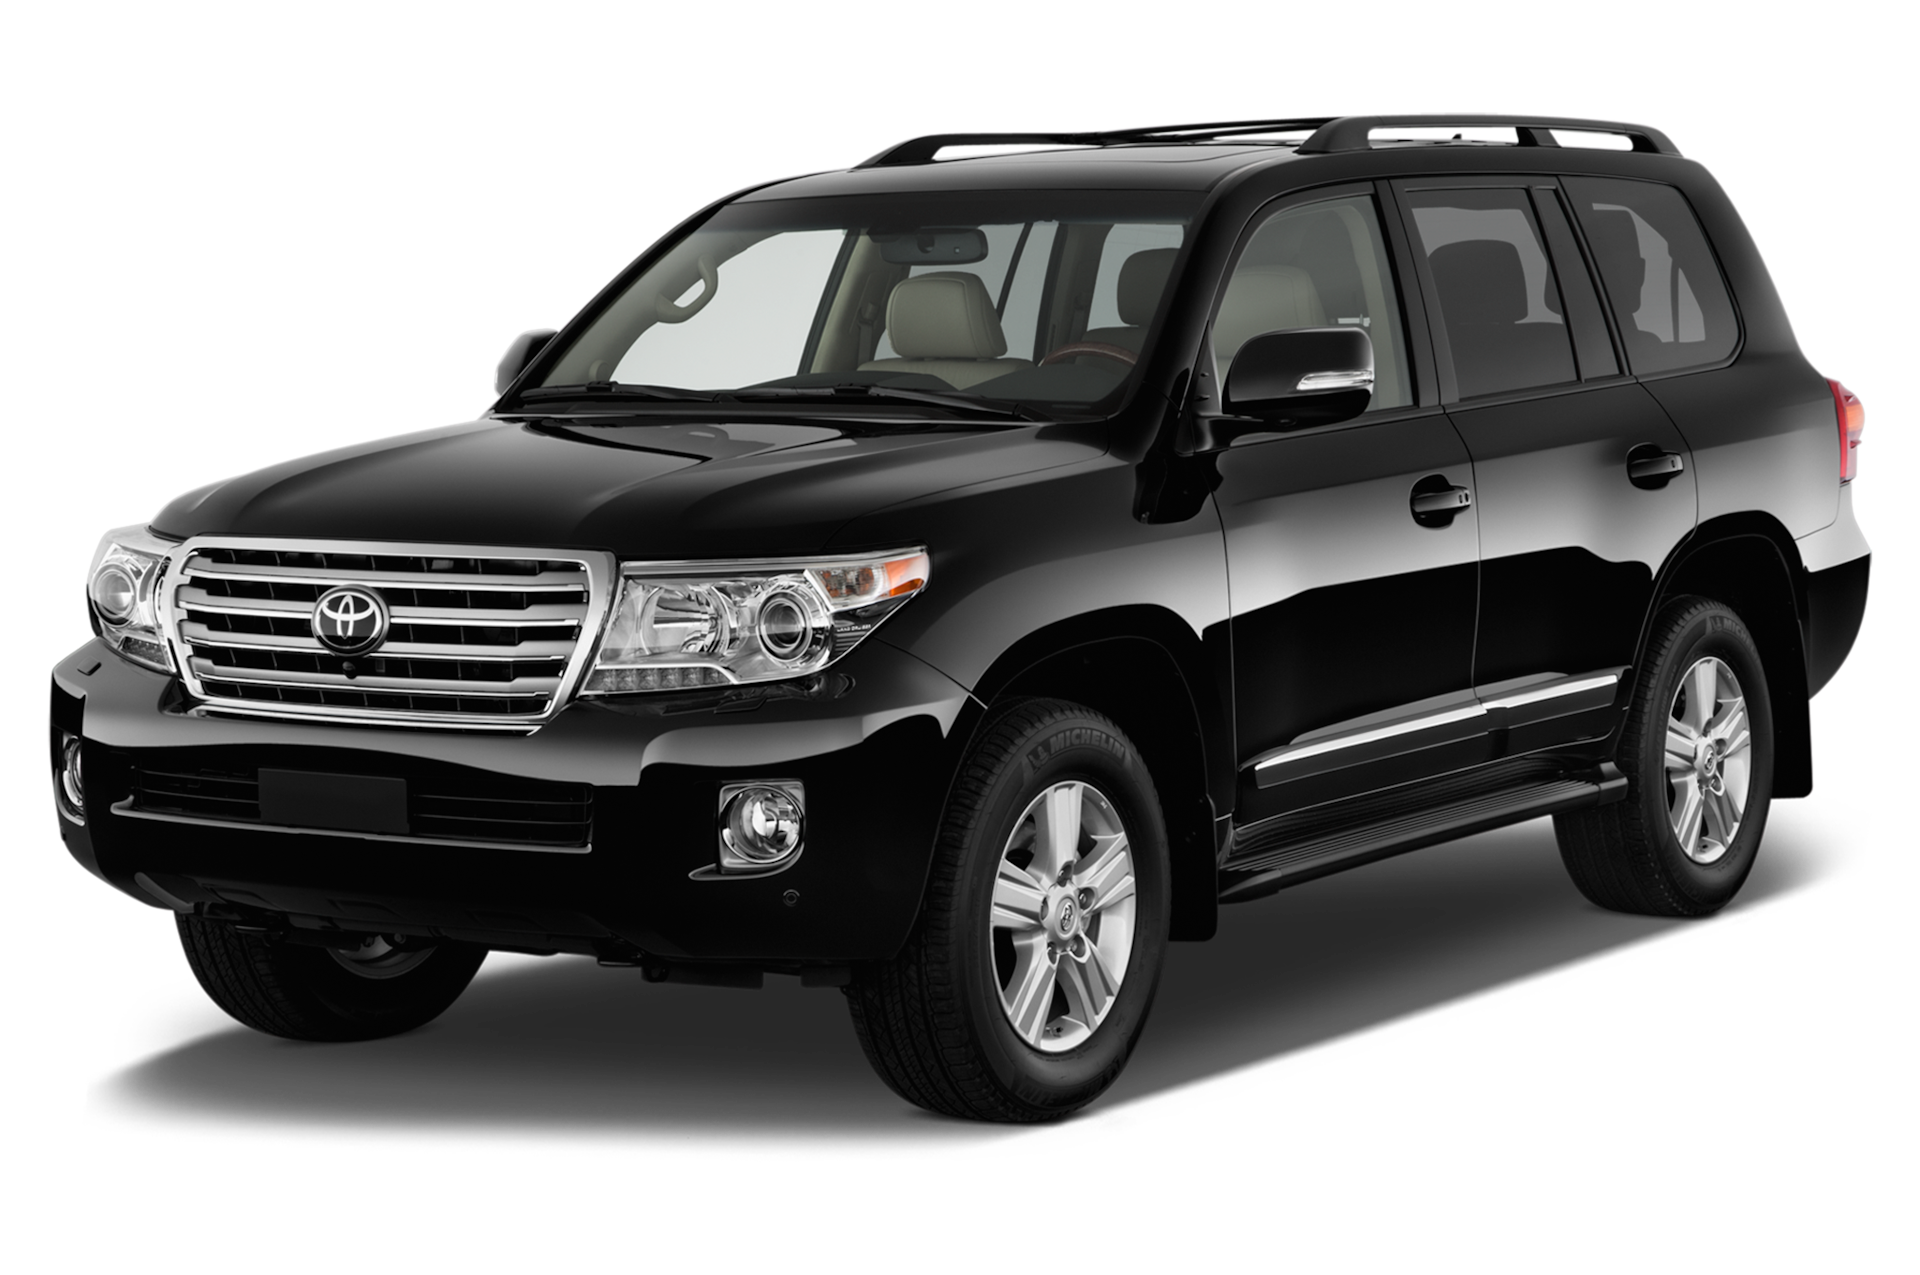 2013 Toyota Land Cruiser Prices, Reviews, and Photos - MotorTrend